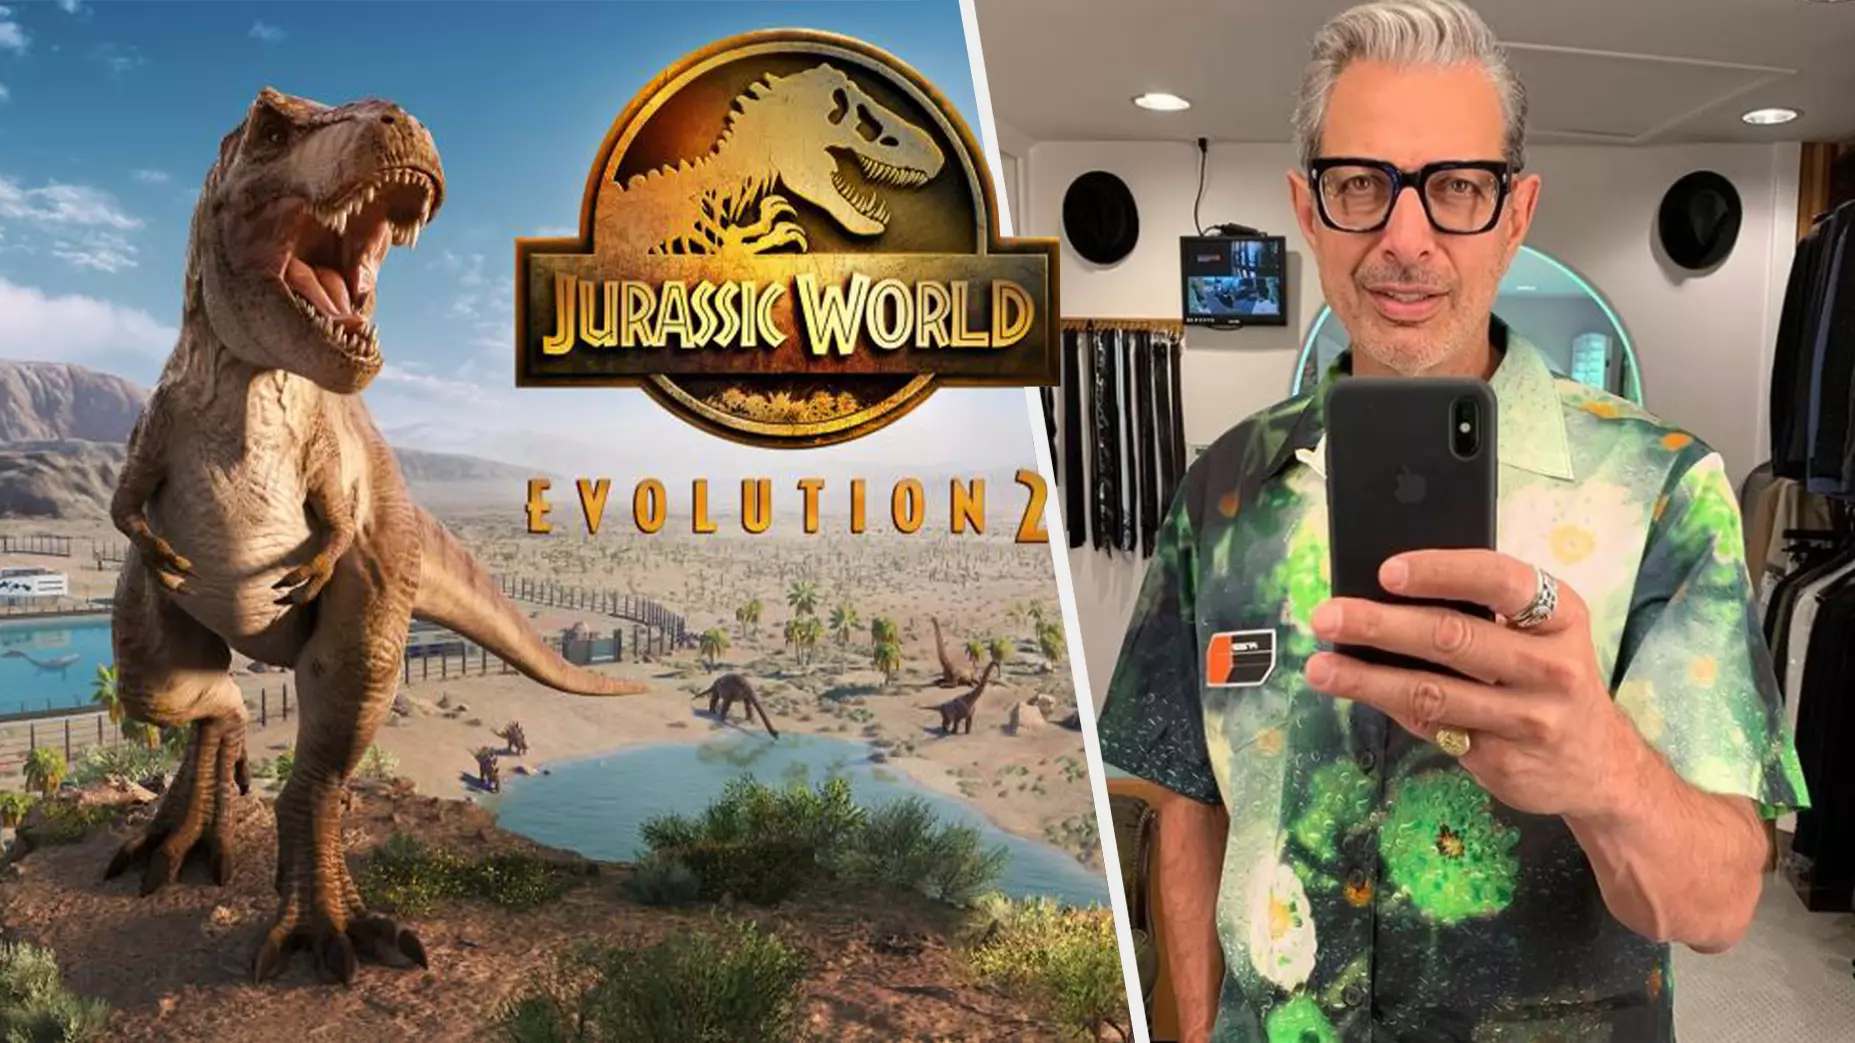 Jeff Goldblum Reacting To New Dinosaurs In 'Jurassic World Evolution 2' Is Very Wholesome